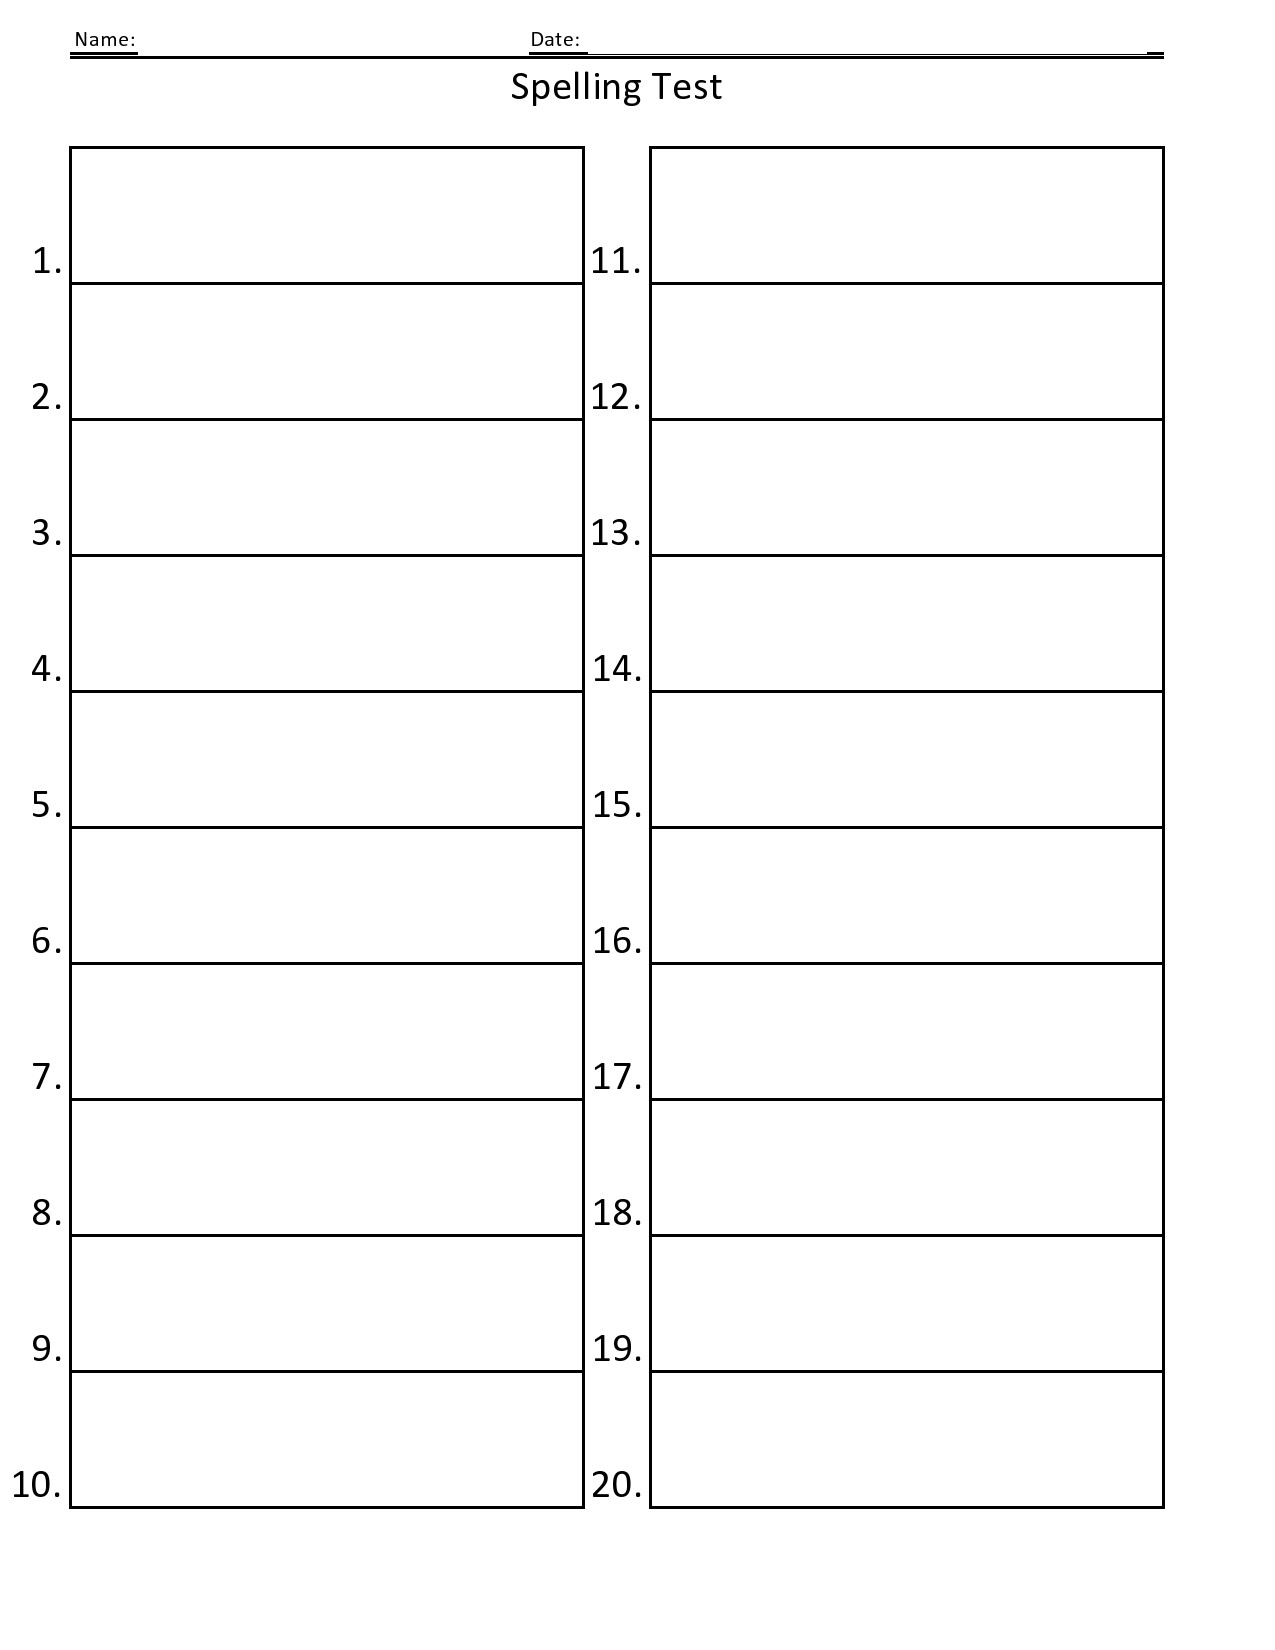 Free spelling test template 11